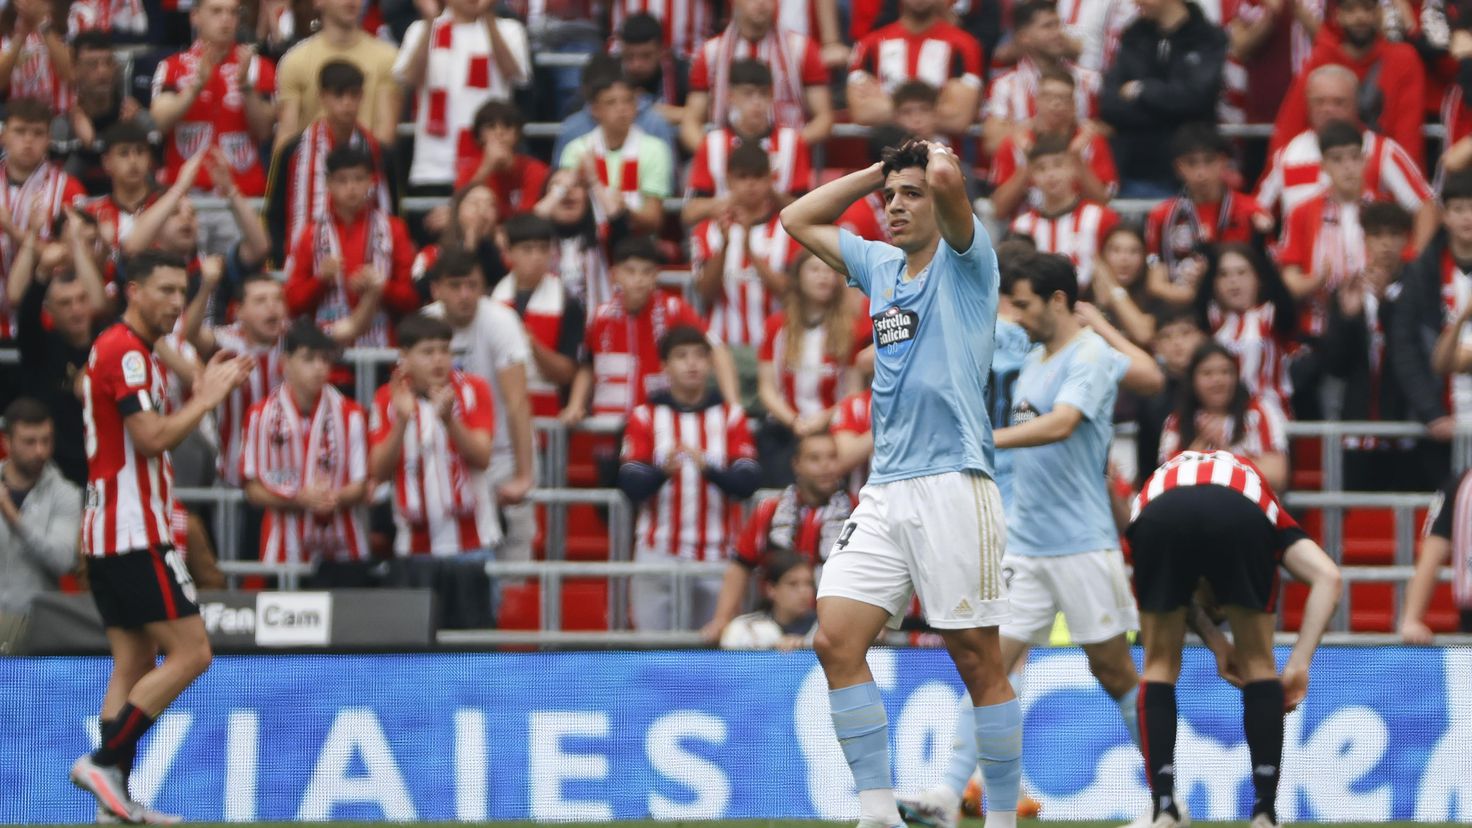 Celta passes and fails: the usual impotence without Aspas
